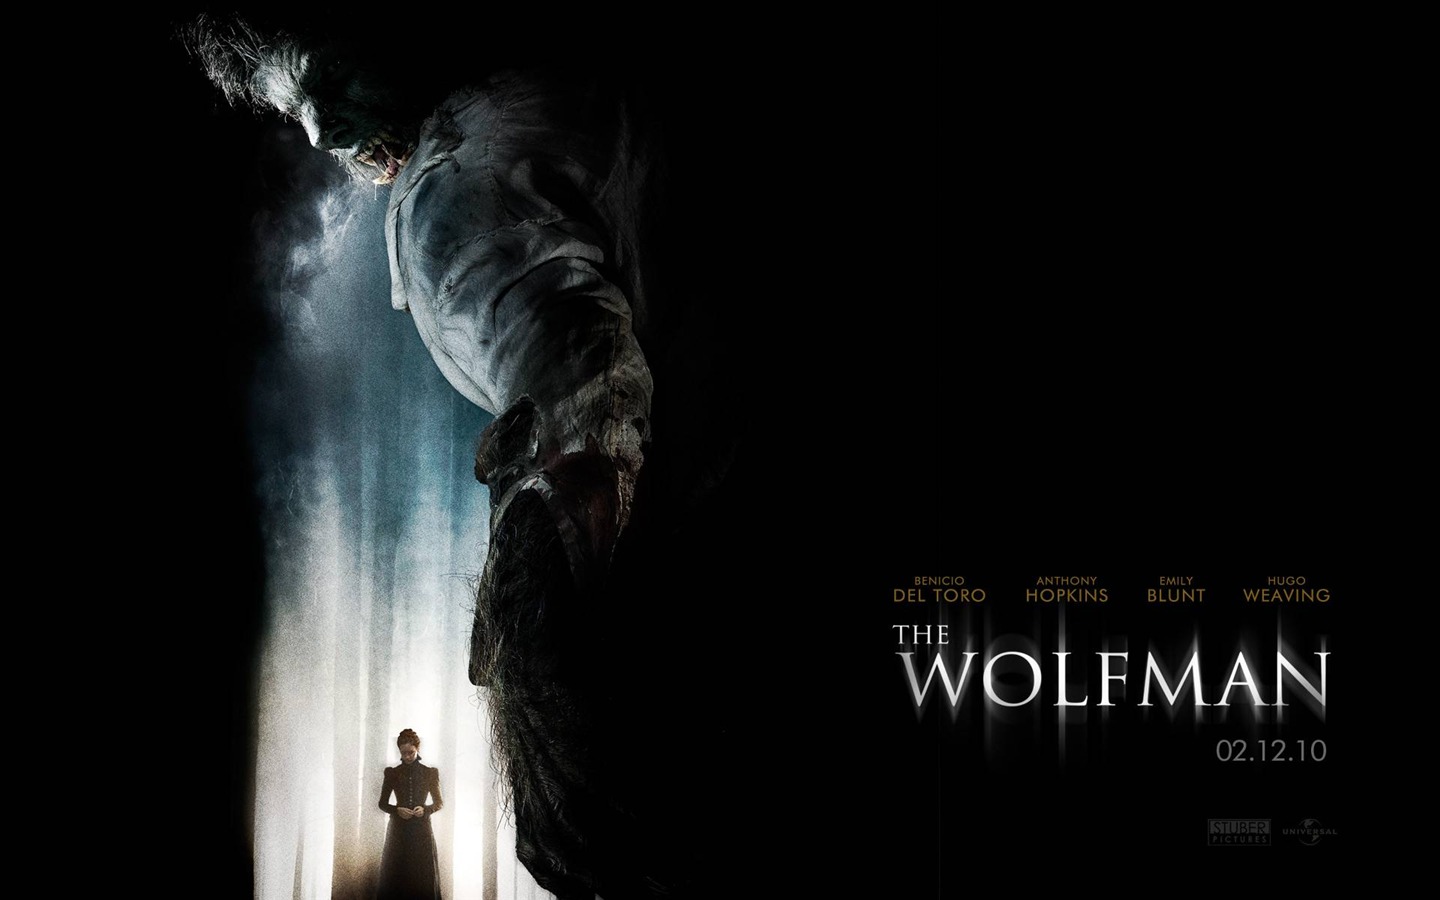 The Wolfman Movie Wallpapers #6 - 1440x900